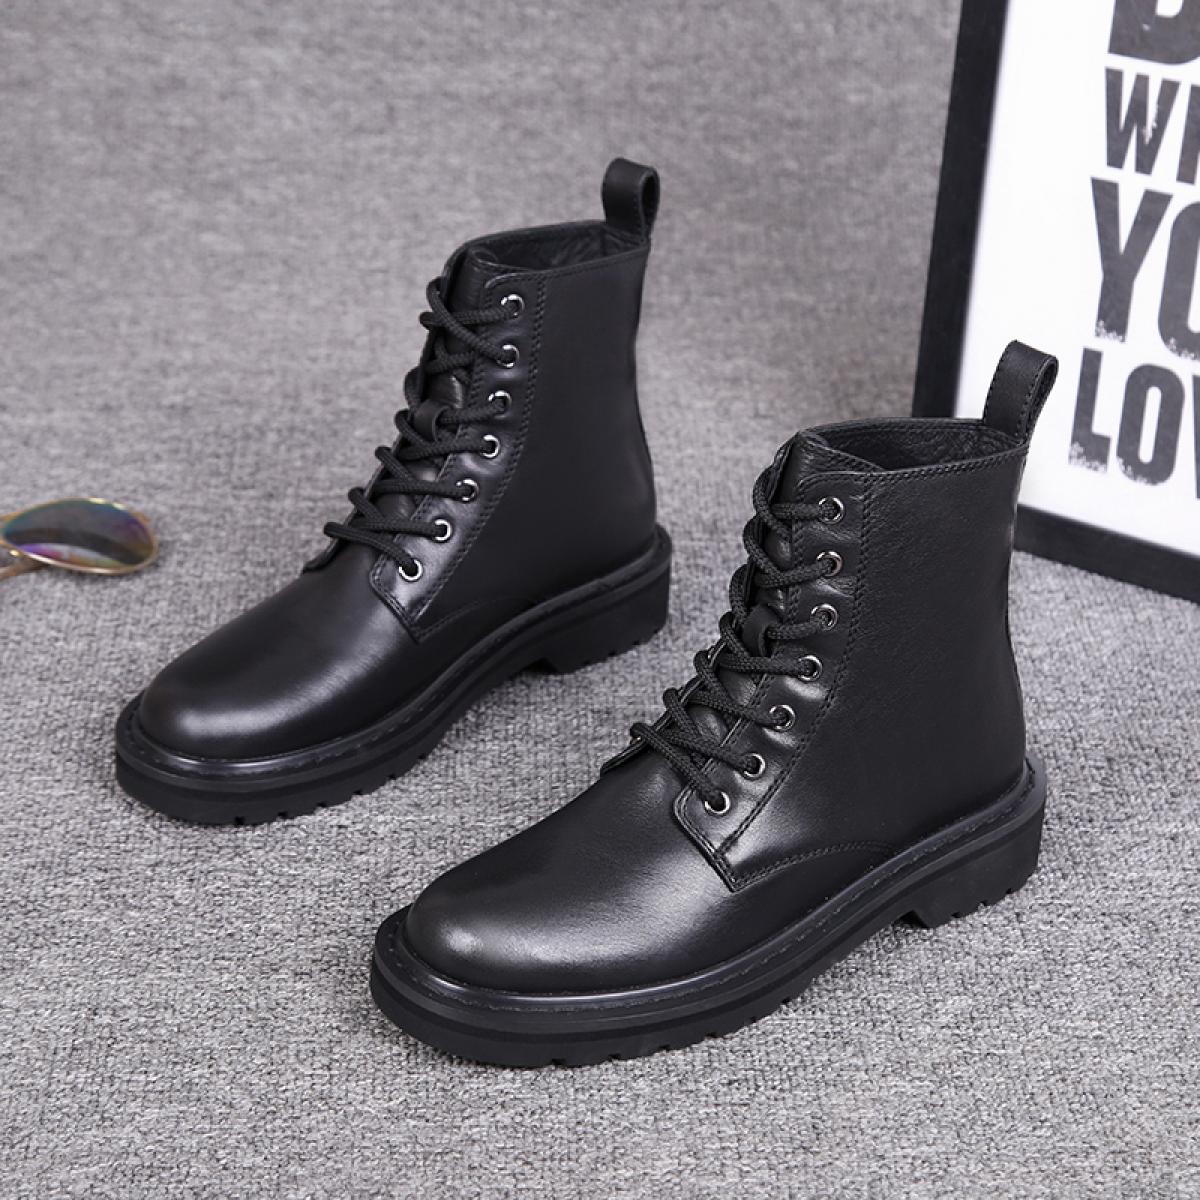 British Style Cowboy Boots For Women Leisure Genuine Leather Shoes Warm Plush Winter Boot Platform Ankle Botas De Mujer 